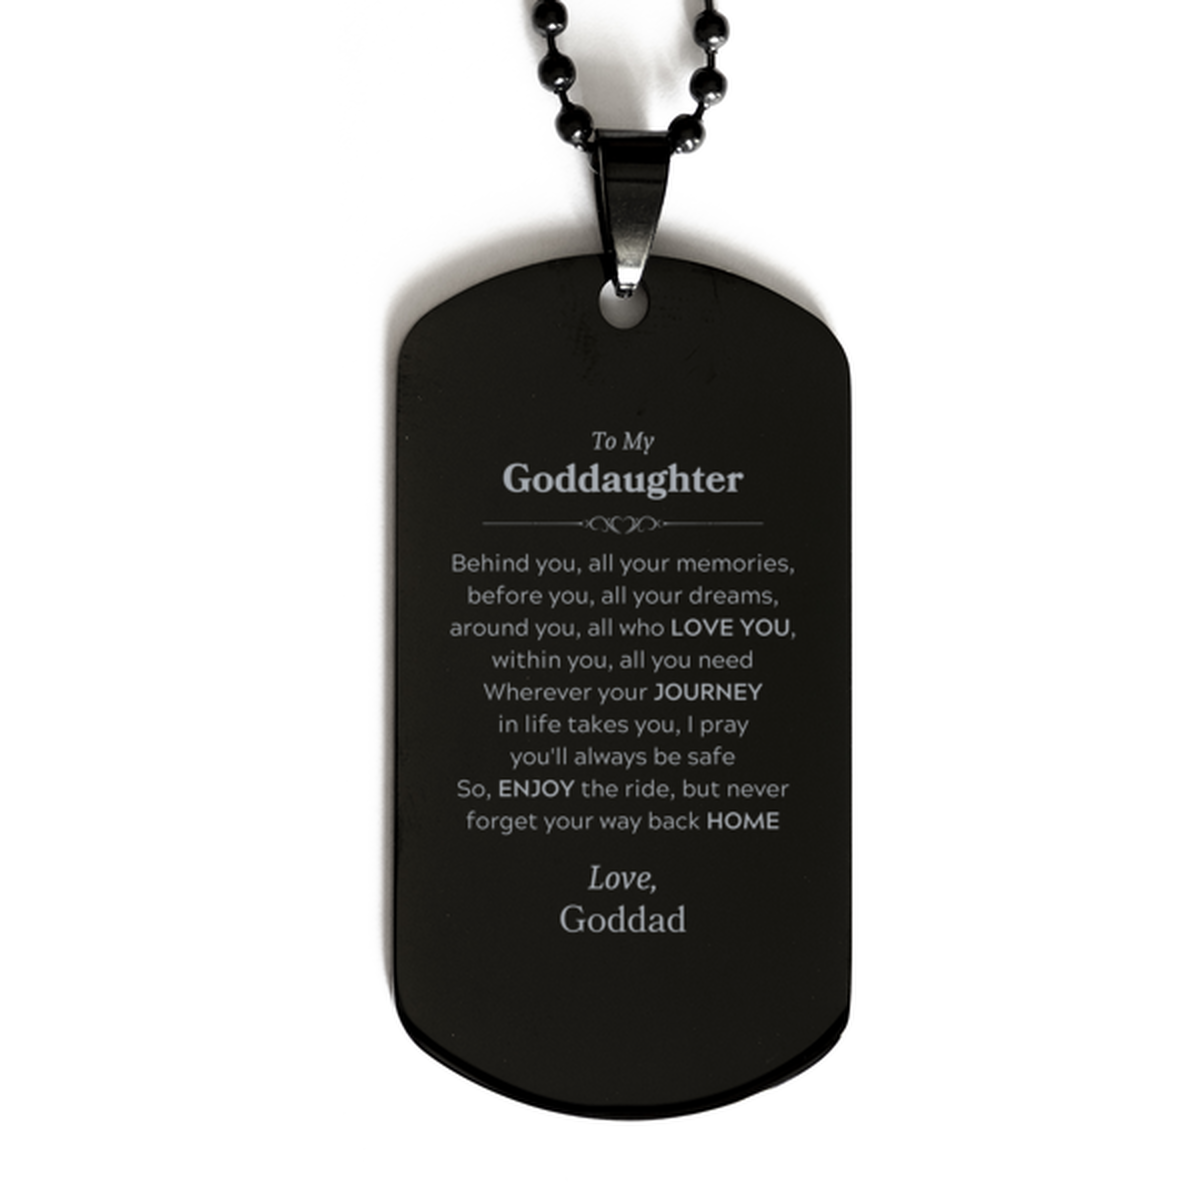 To My Goddaughter Graduation Gifts from Goddad, Goddaughter Black Dog Tag Christmas Birthday Gifts for Goddaughter Behind you, all your memories, before you, all your dreams. Love, Goddad